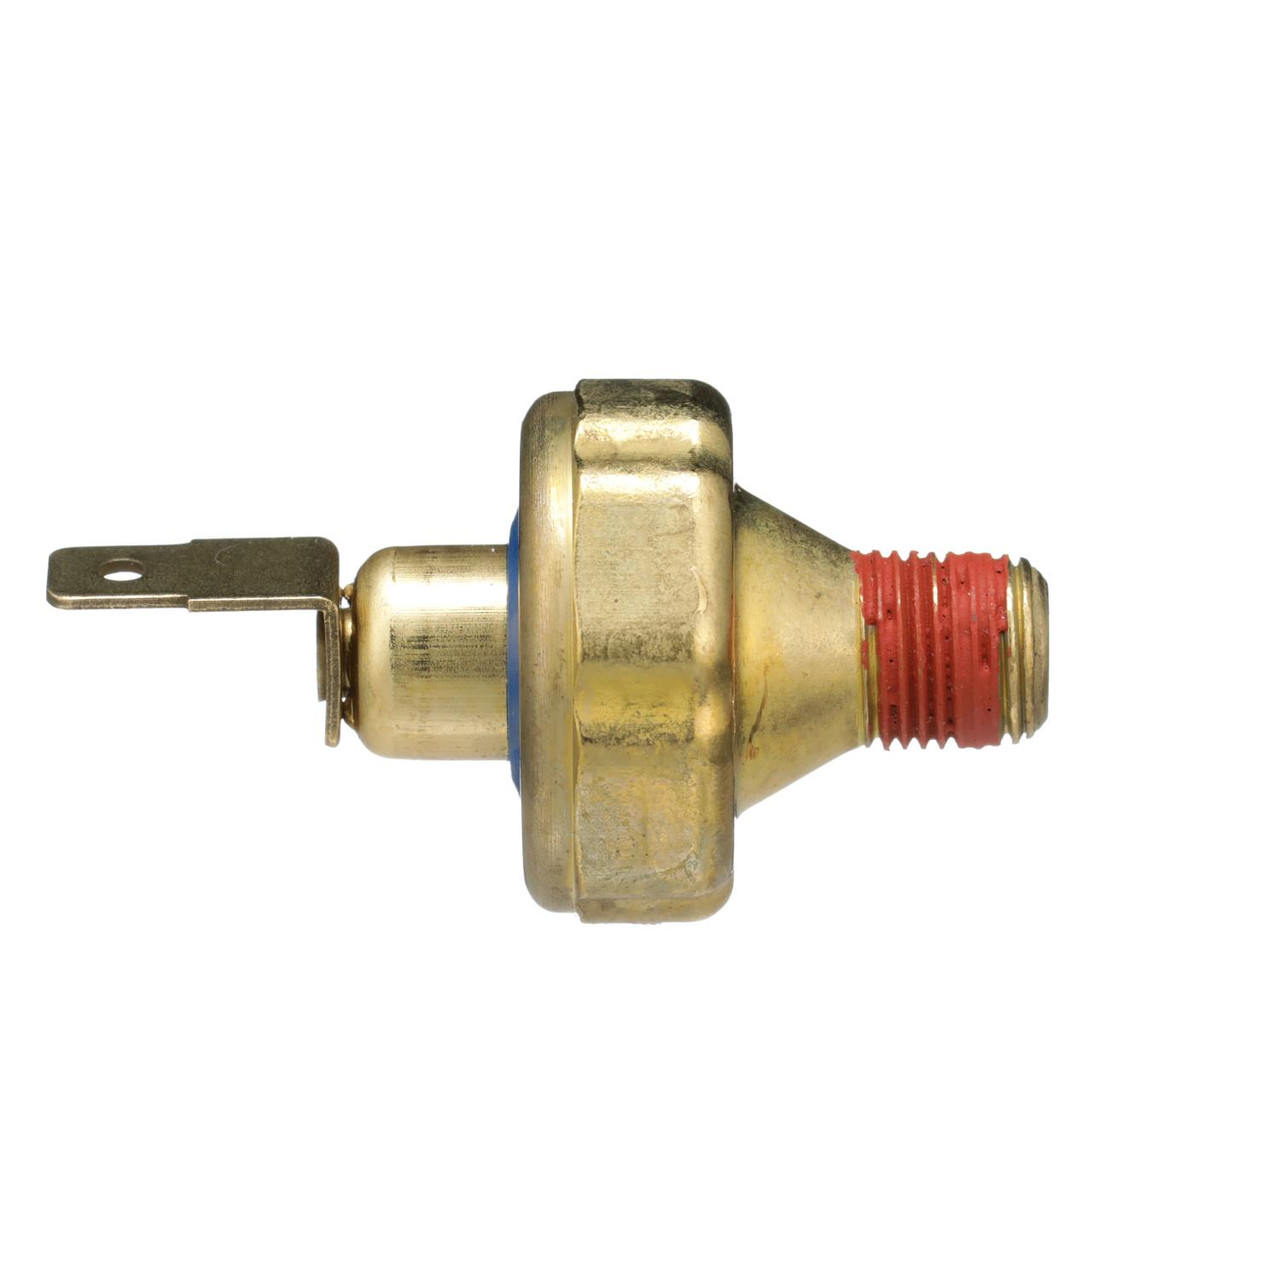 Oil Pressure Switch for Dash Dummy Light 1963-1972 Except Buick 350